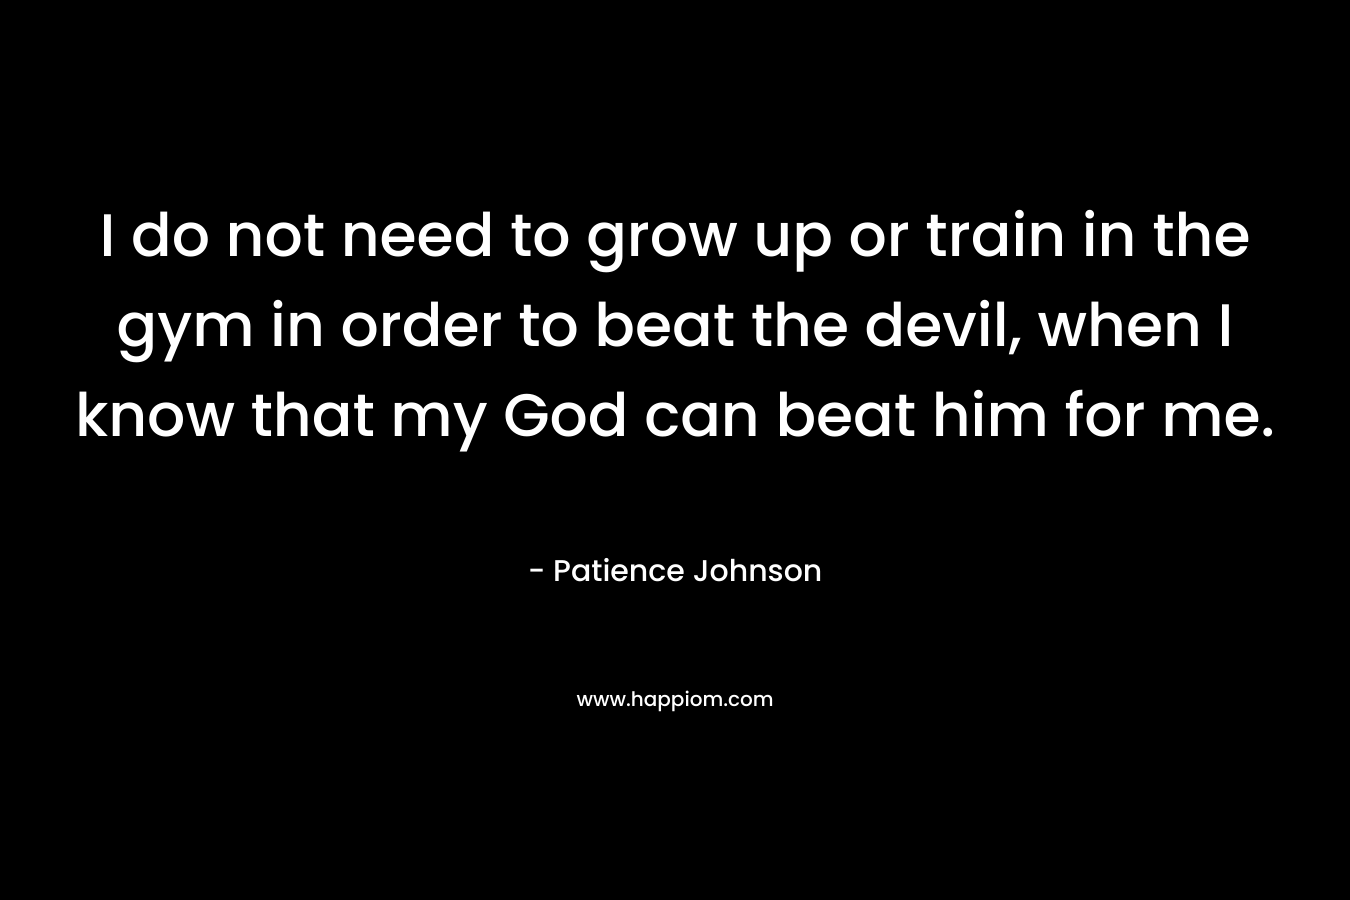 I do not need to grow up or train in the gym in order to beat the devil, when I know that my God can beat him for me.